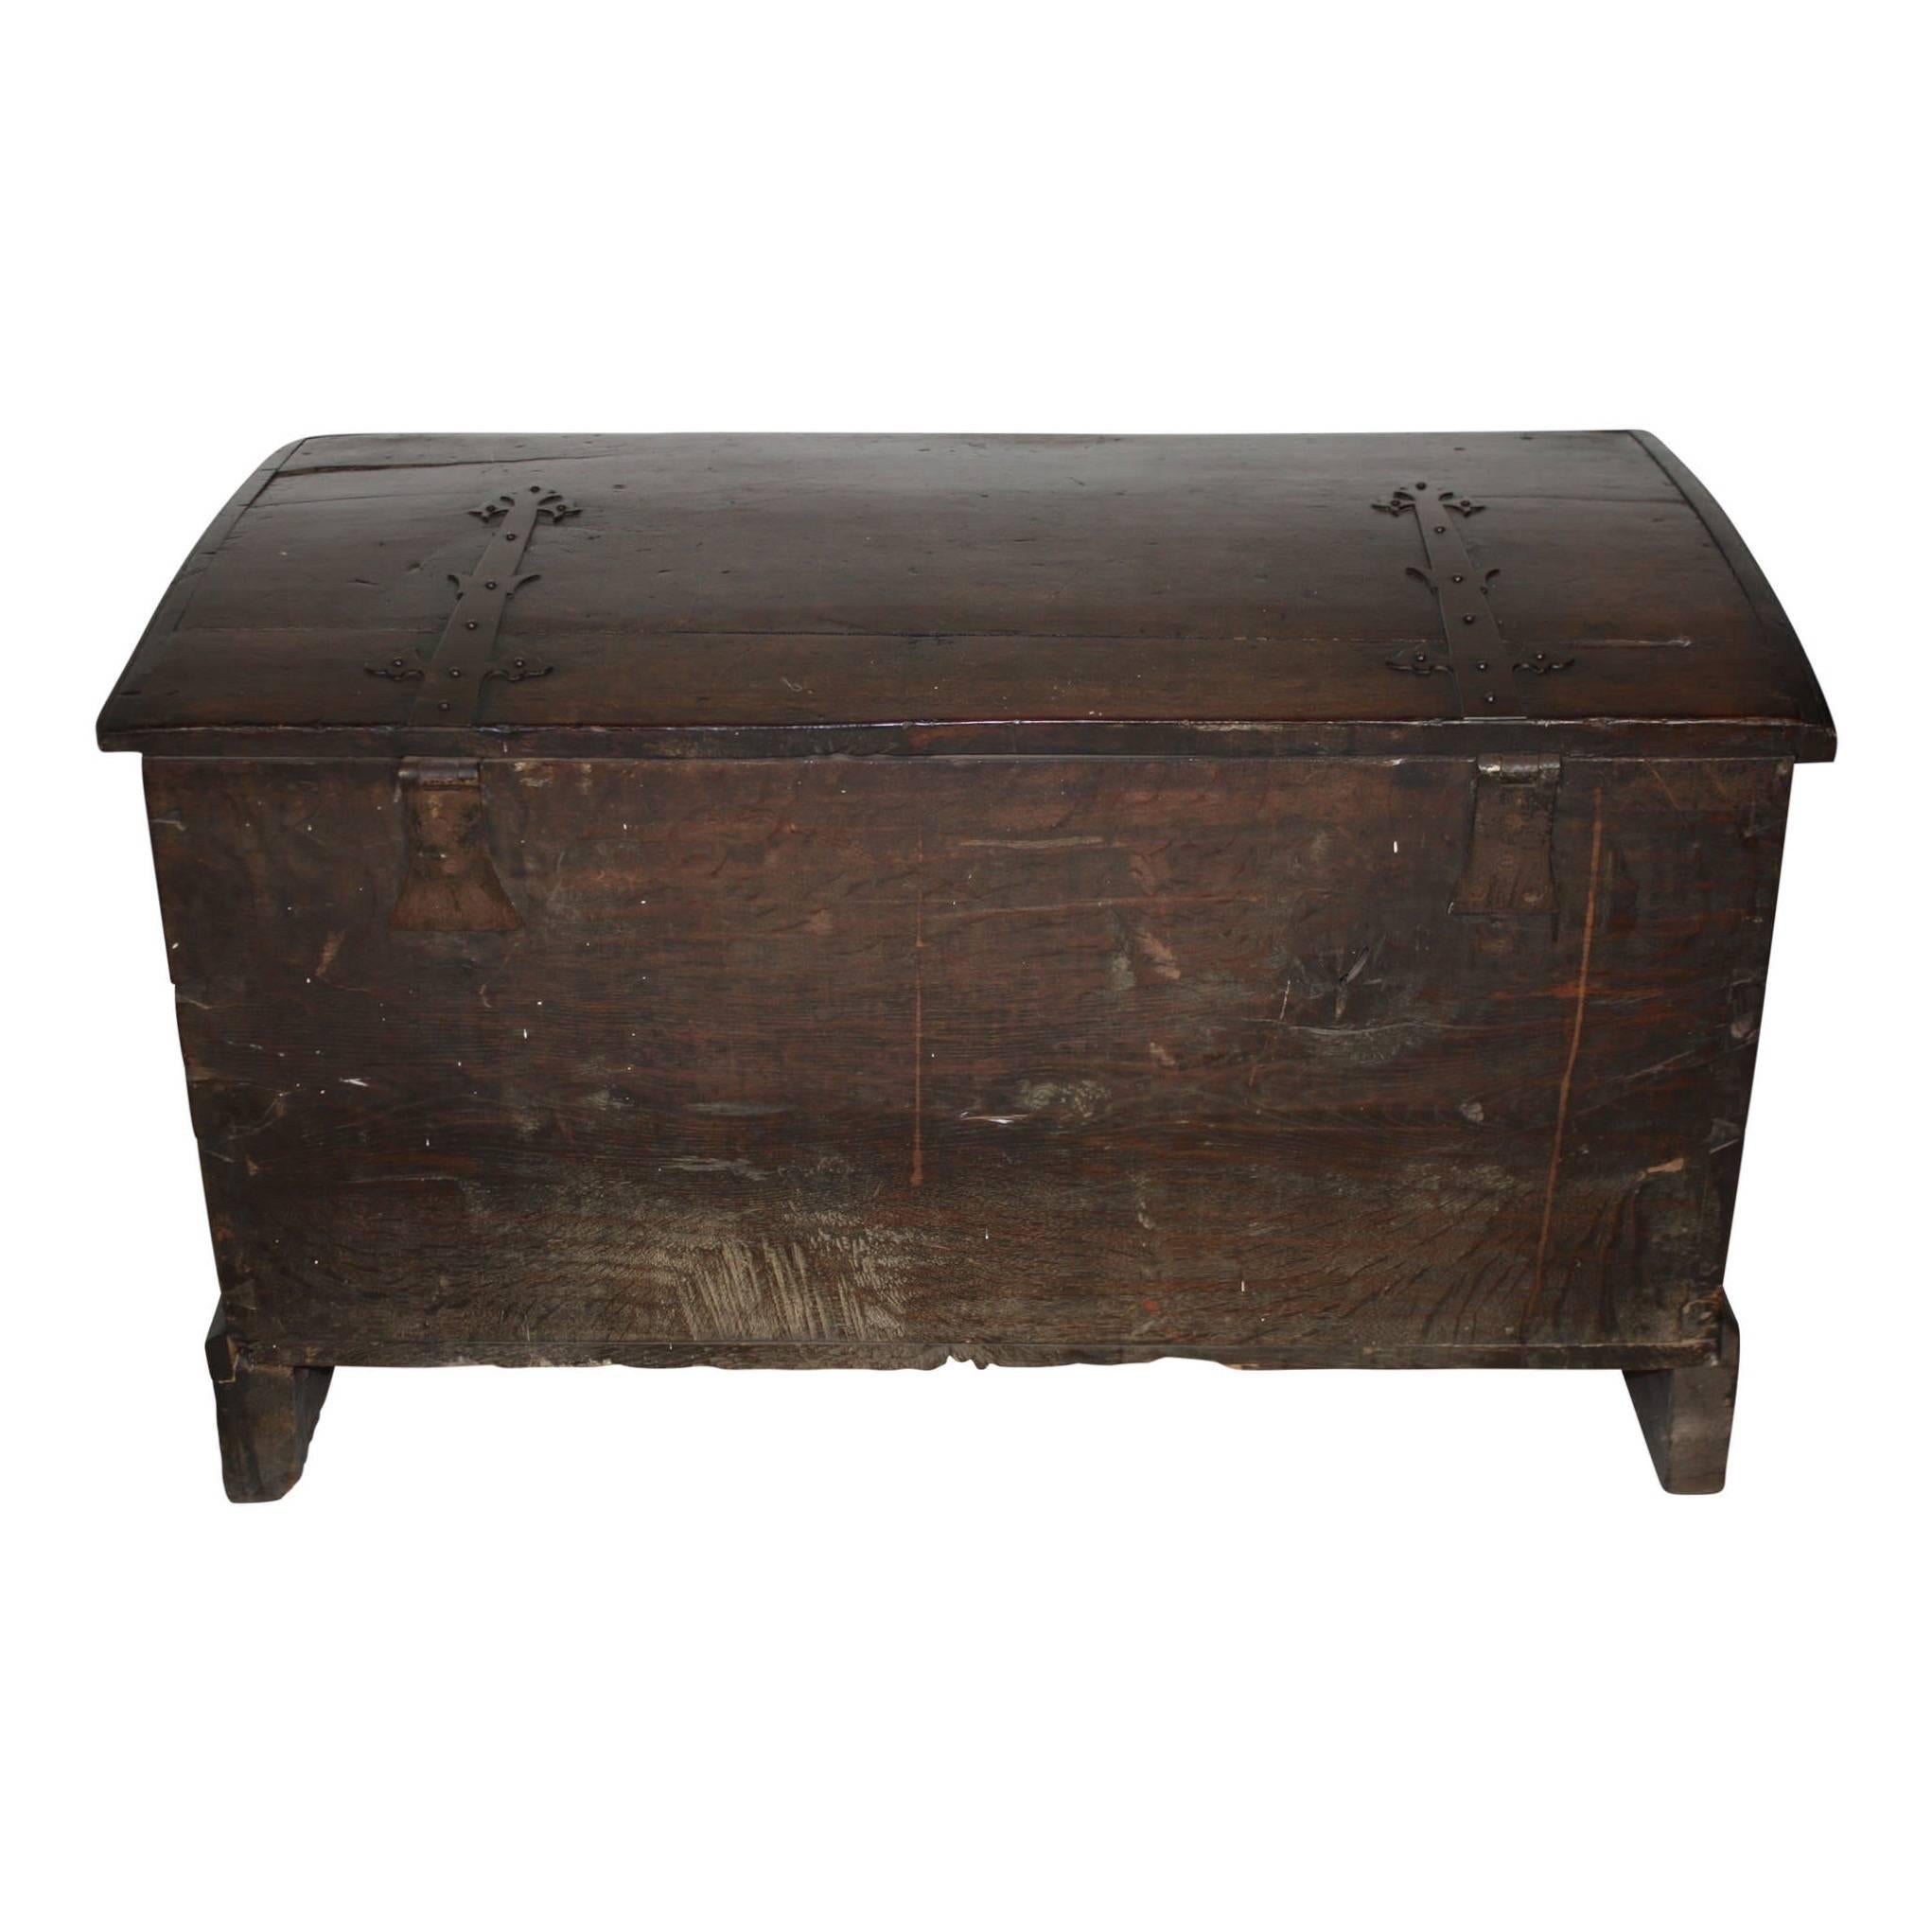 Maple Early 19th Century Re-Purposed English Trunk For Sale